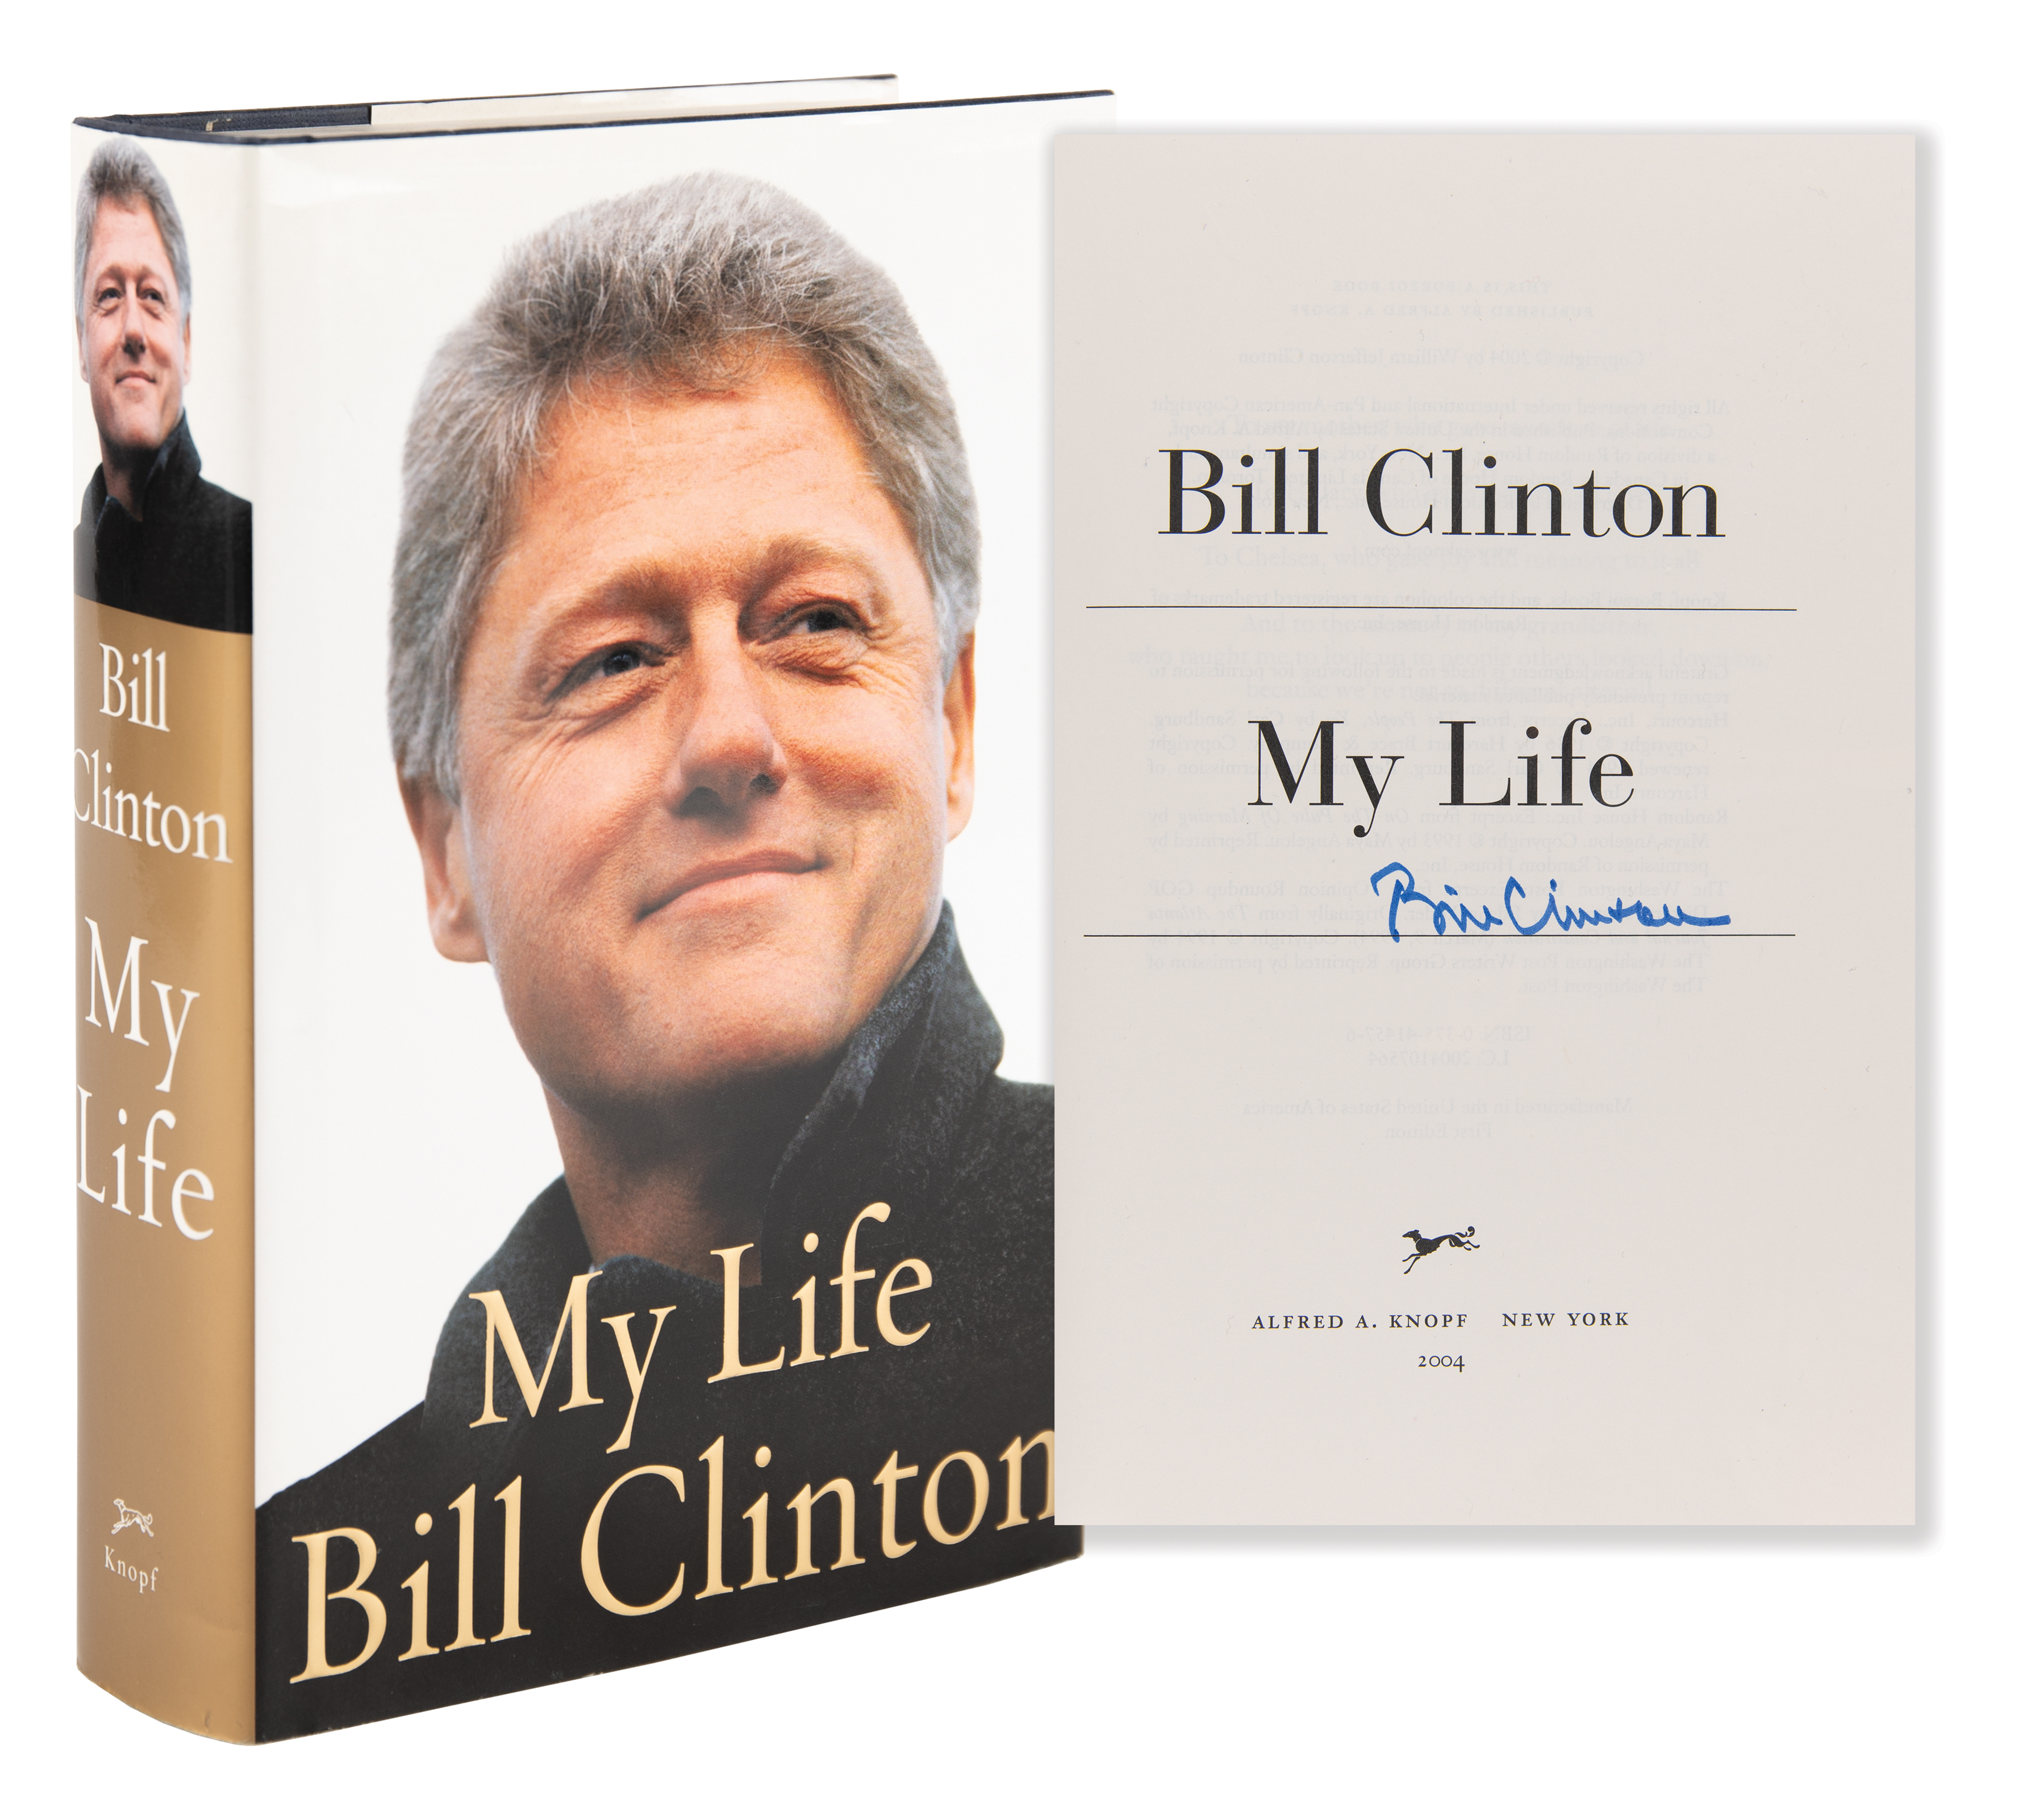 Lot #56 Bill Clinton Signed Book - My Life